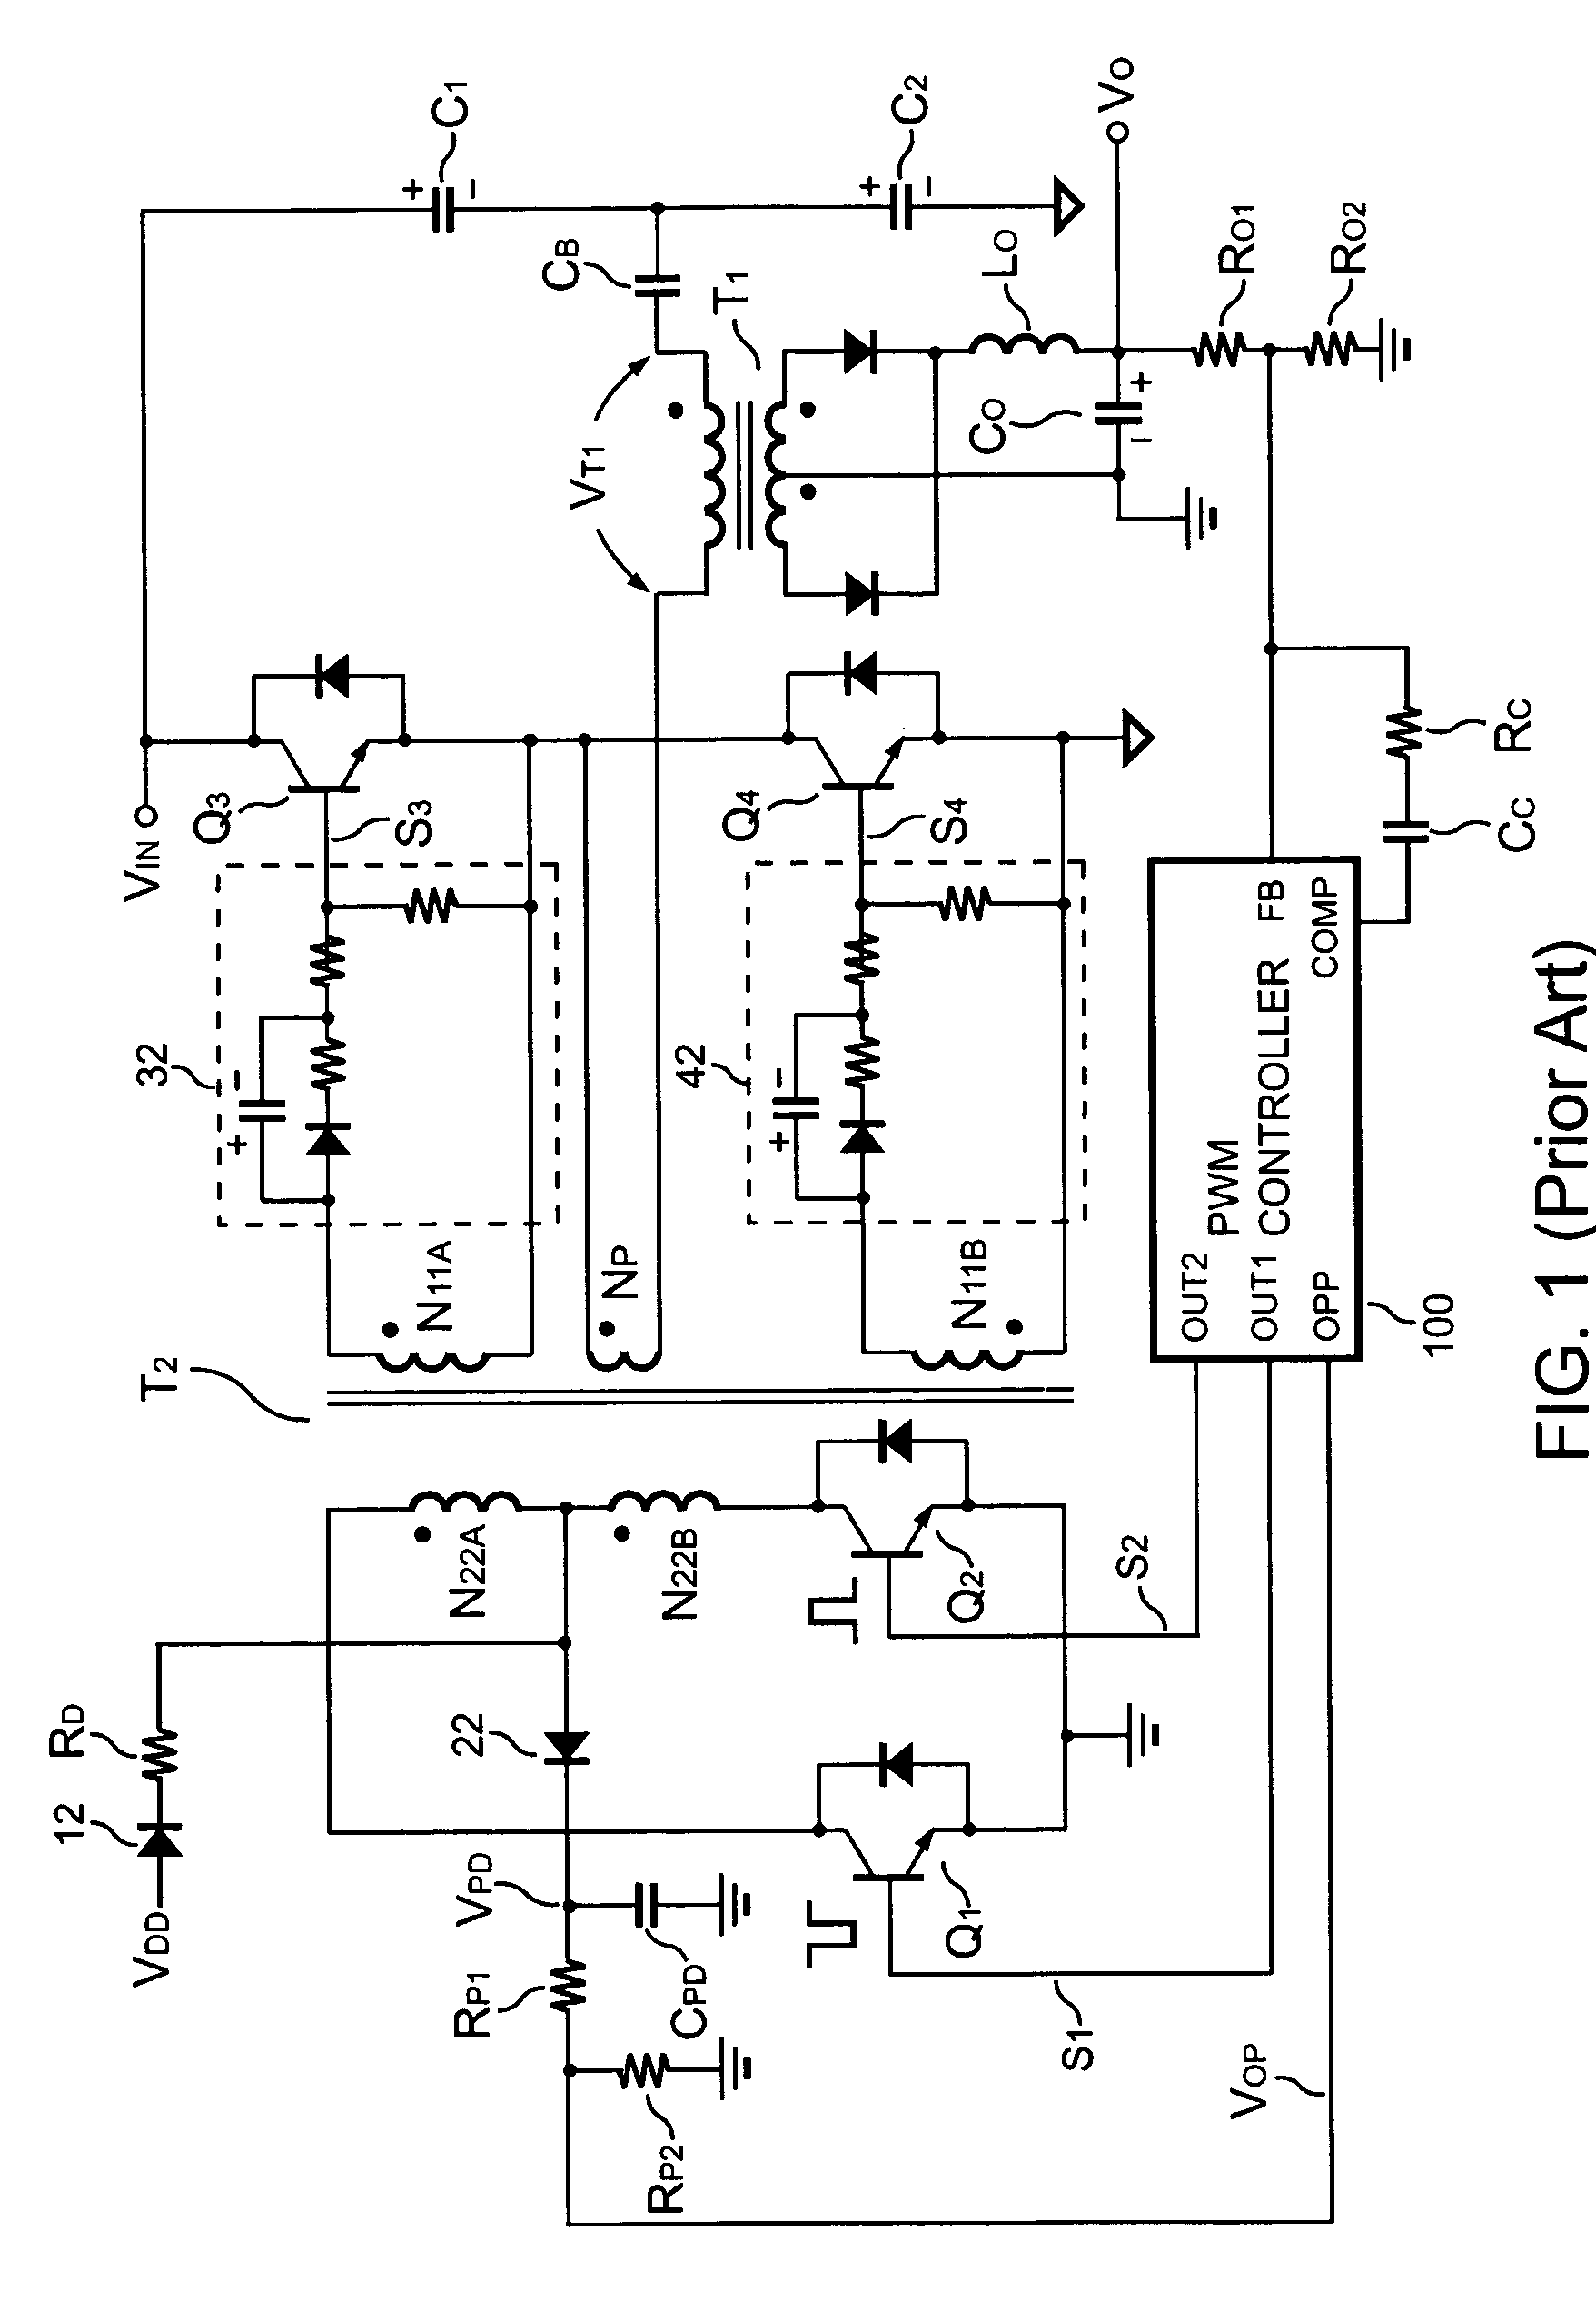 Over-power protection apparatus for self-excited power converter